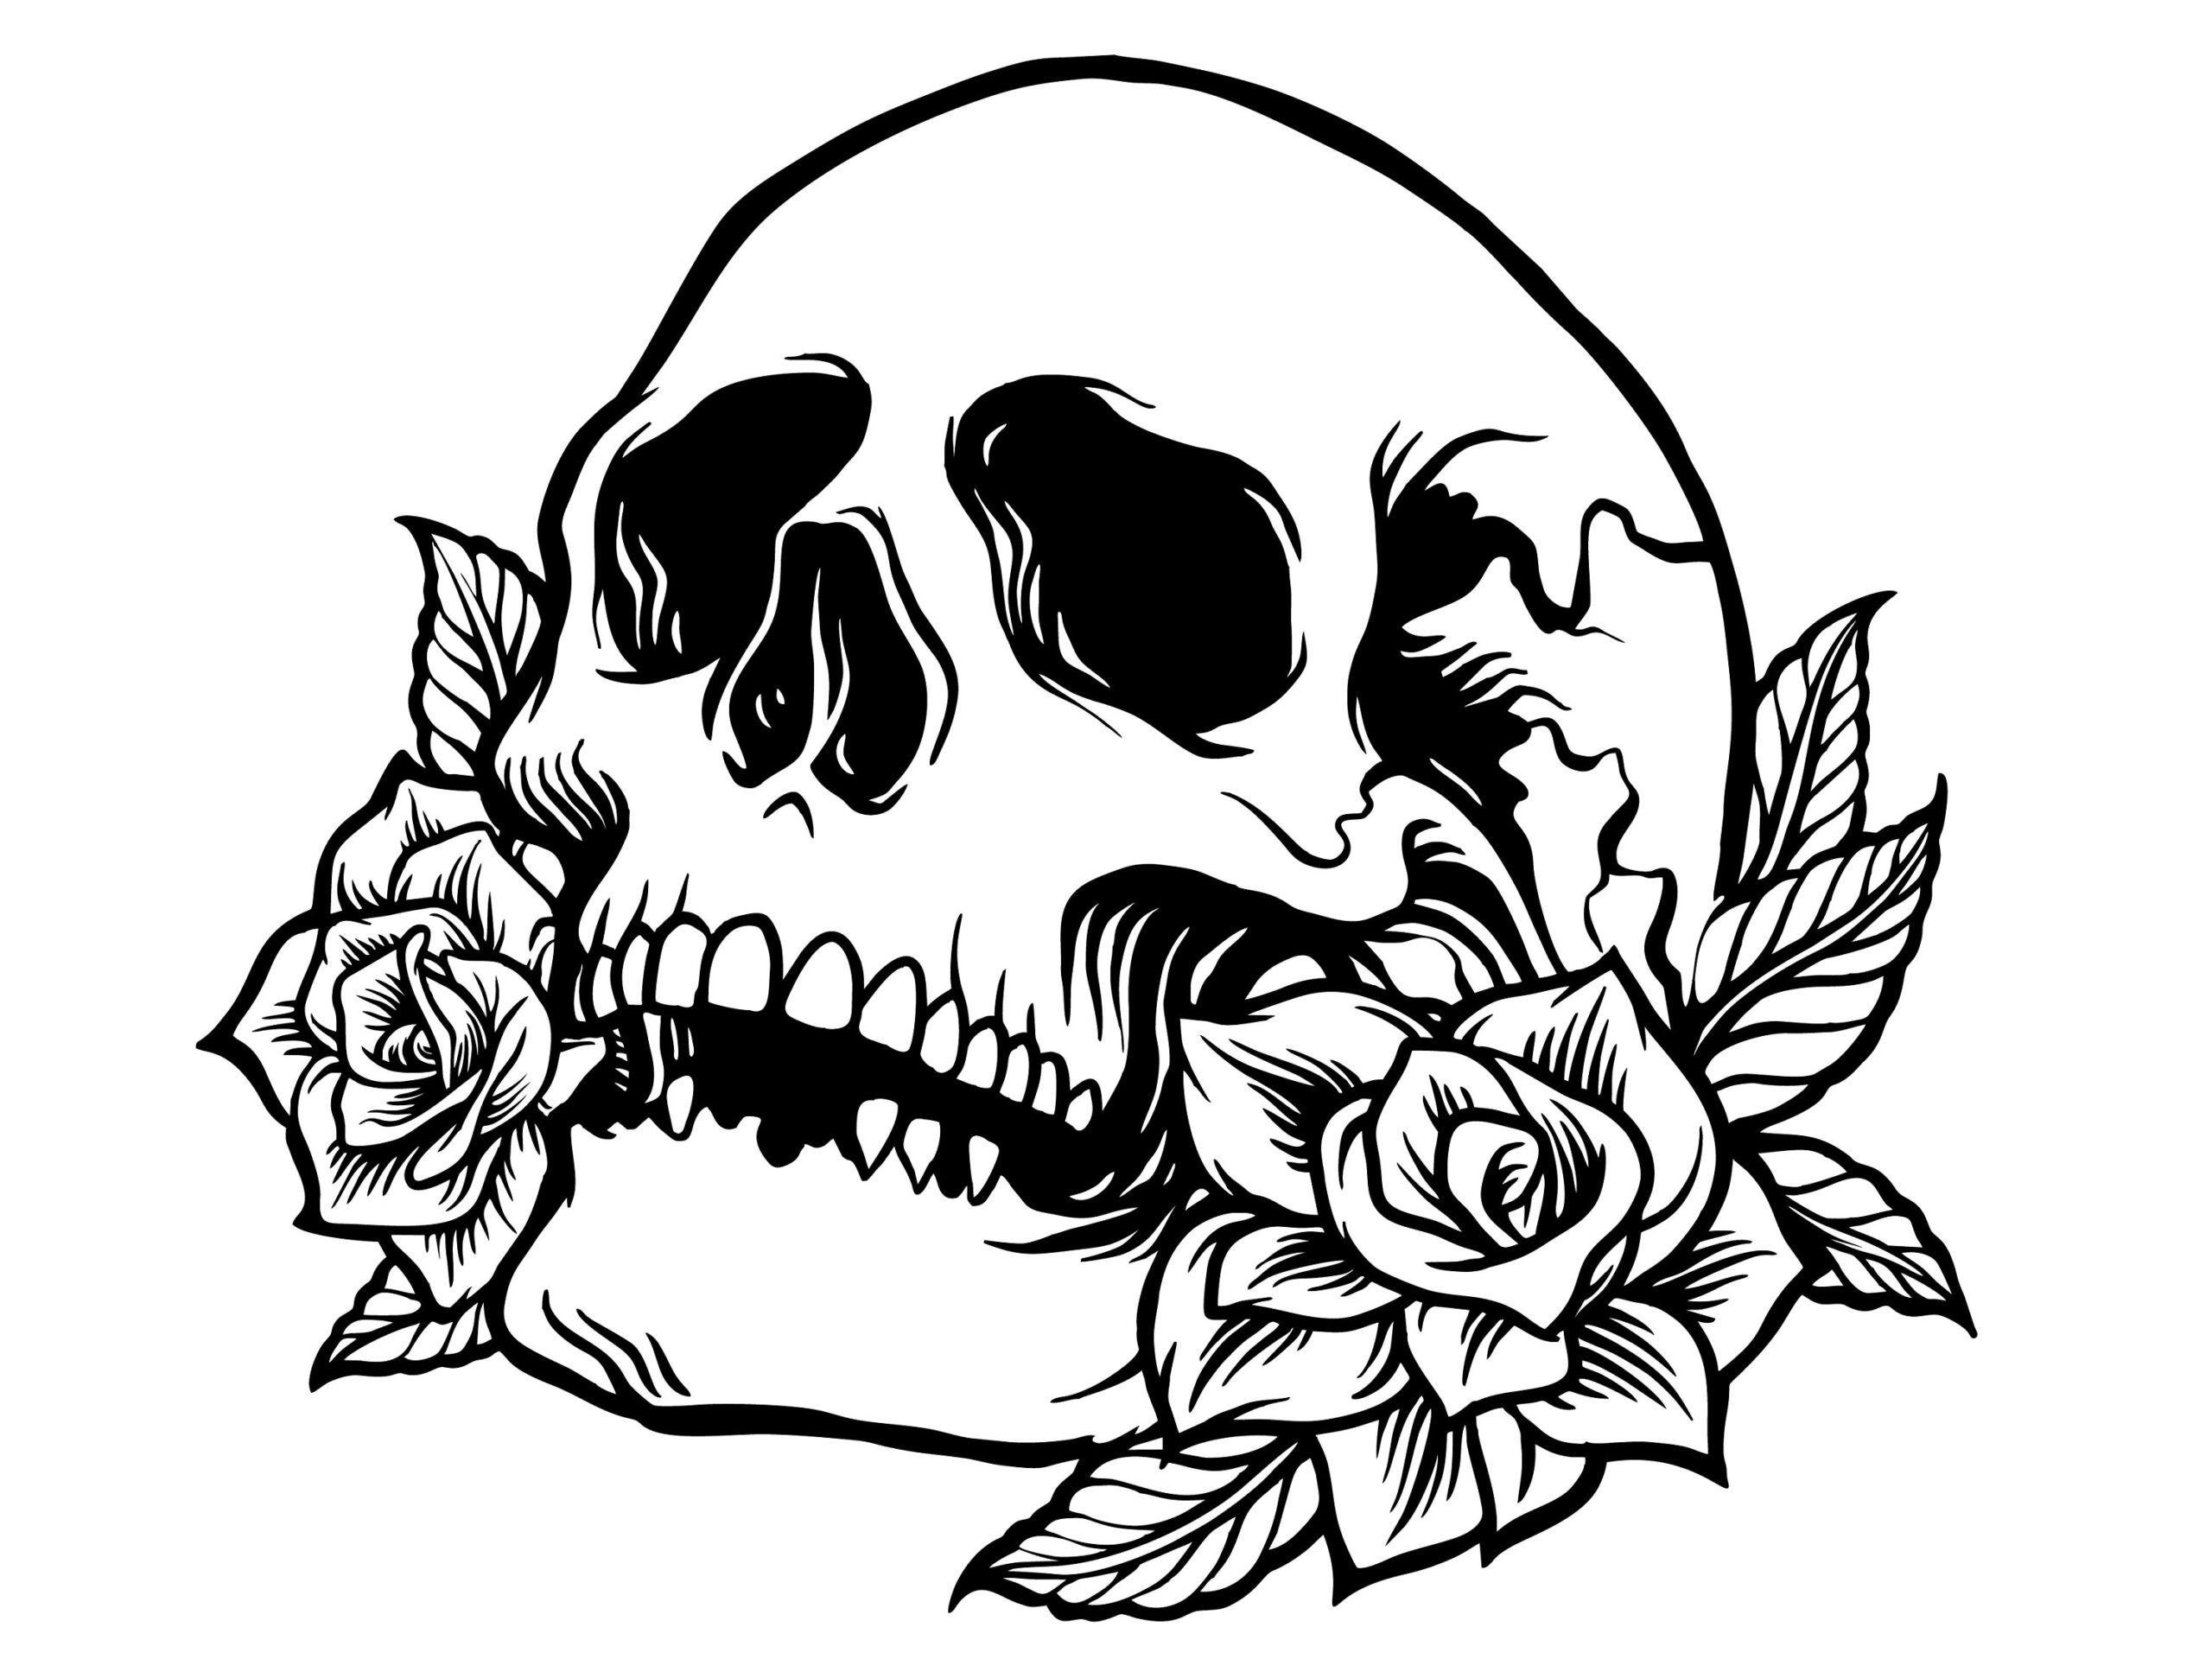 Drawn Skull With Roses floral tattoo Design cricut cut File file In Svg instant Download auto Cad tshirt Graphic printable stencil Etsy Sweden